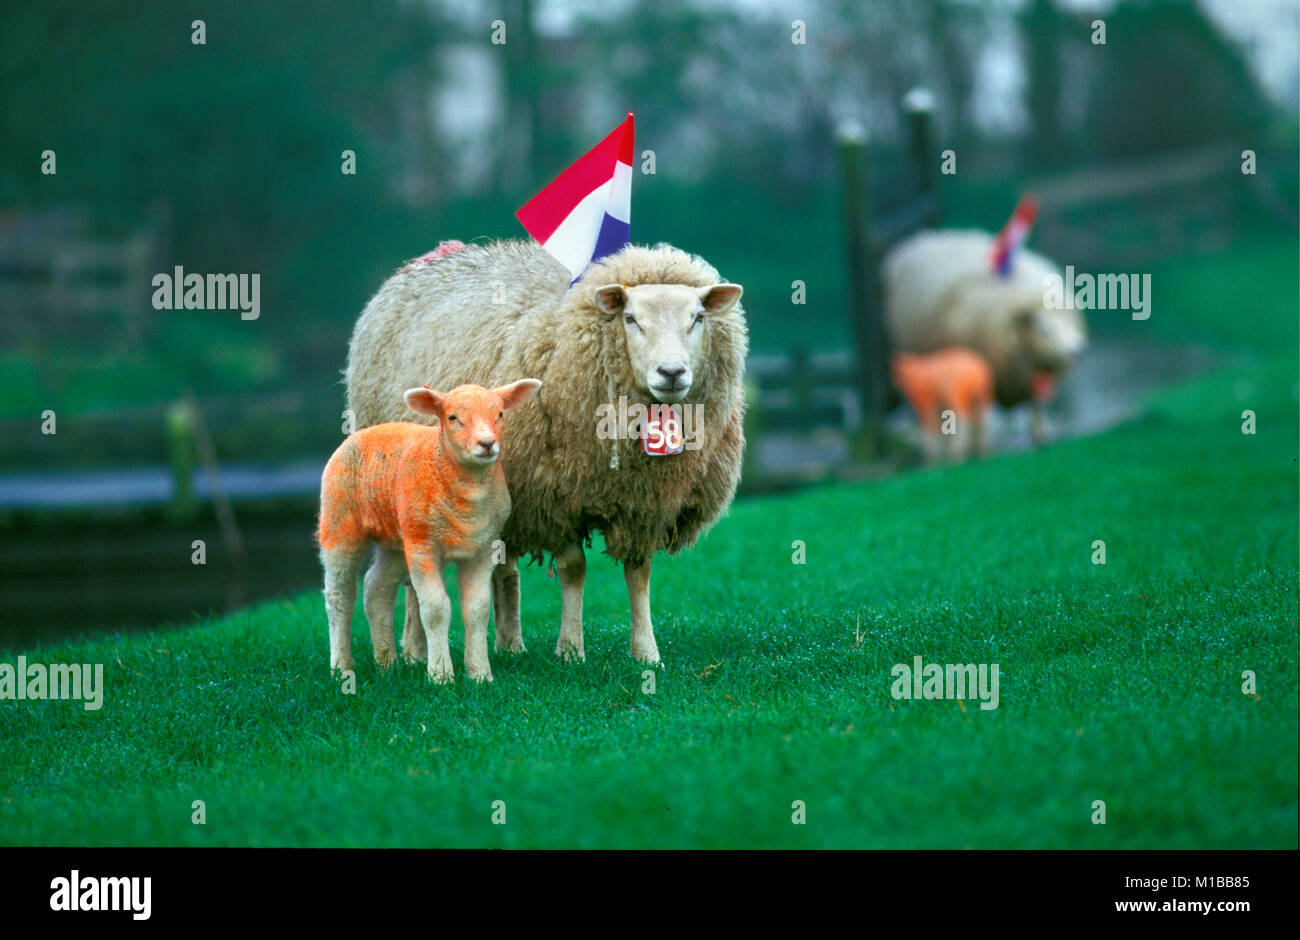 The Netherlands. Marken. Annual festival Kingsday 27 April. Sheep painted in national color orange and Dutch flag. Stock Photo